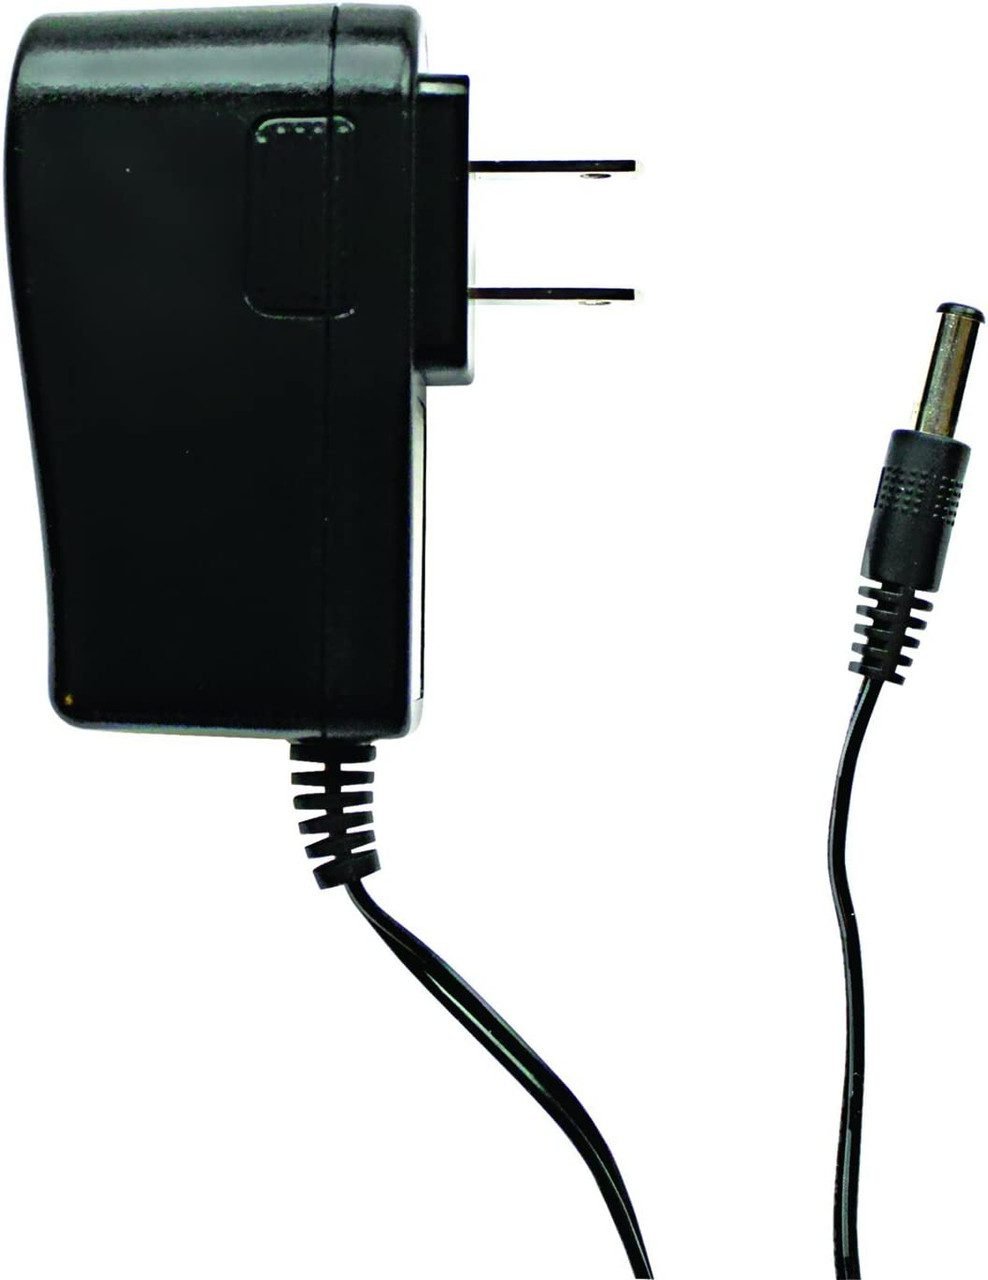 Associated Equipment 6010B 6/12/24 Volt Heavy-Duty Commercial Portable Battery  Charger